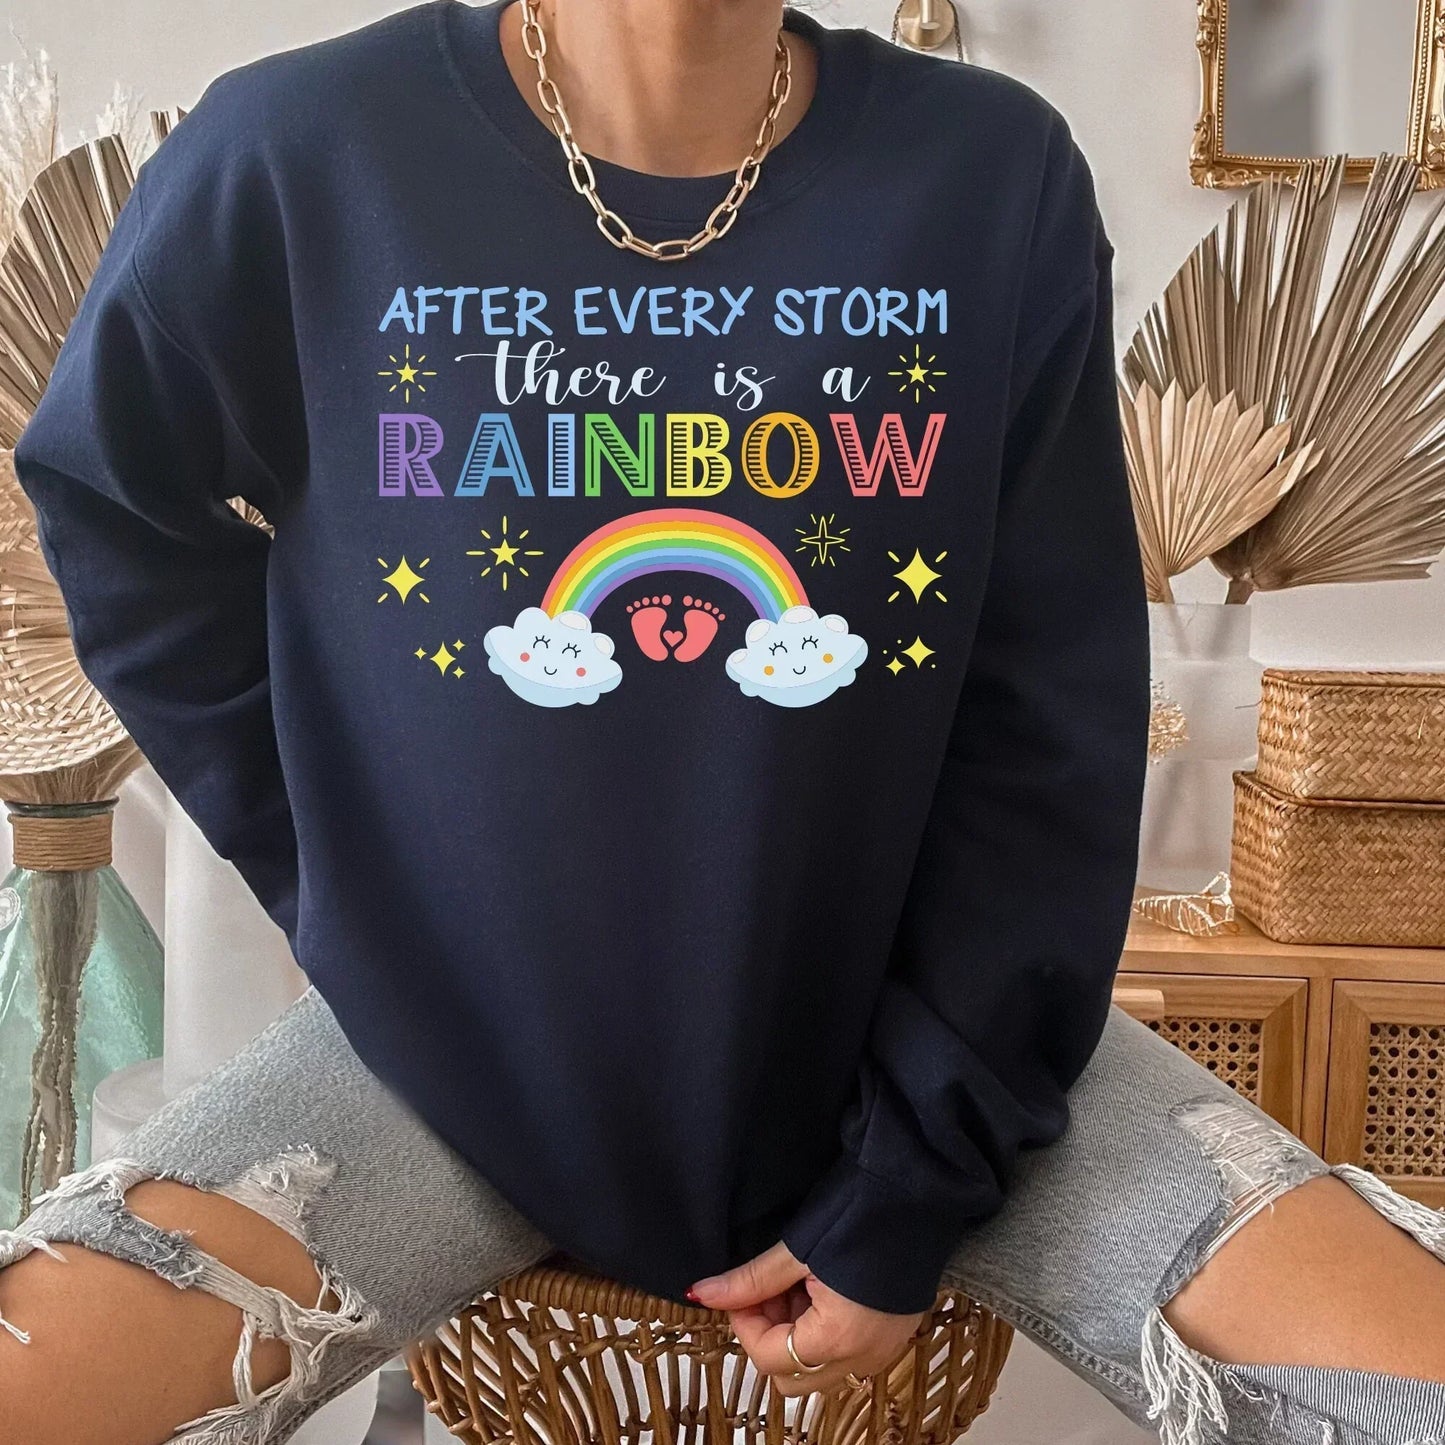 Pregnancy sweatshirt, Maternity shirt, Rainbow Pregnancy Reveal to Husband, Soon to Be Mom, Expecting Mother Hoodie, New Baby Coming Soon